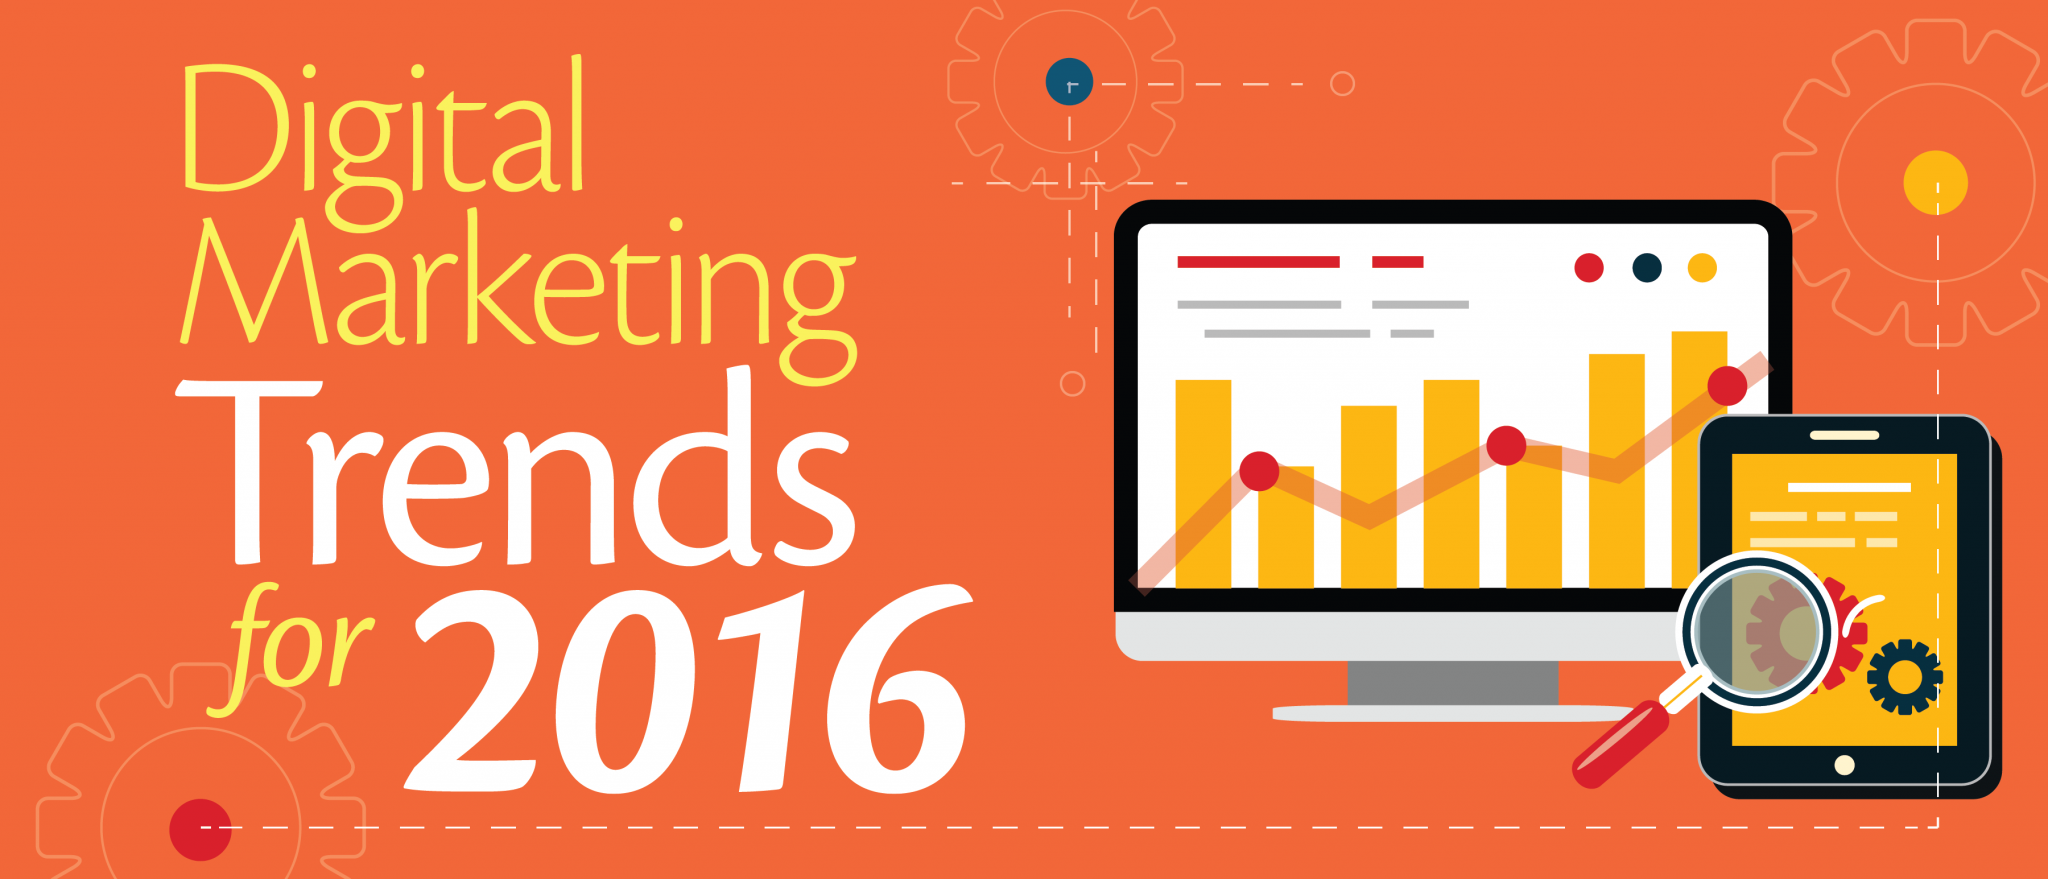 Digital Marketing Trends to Follow in 2016 for Maximum Outcomes ...